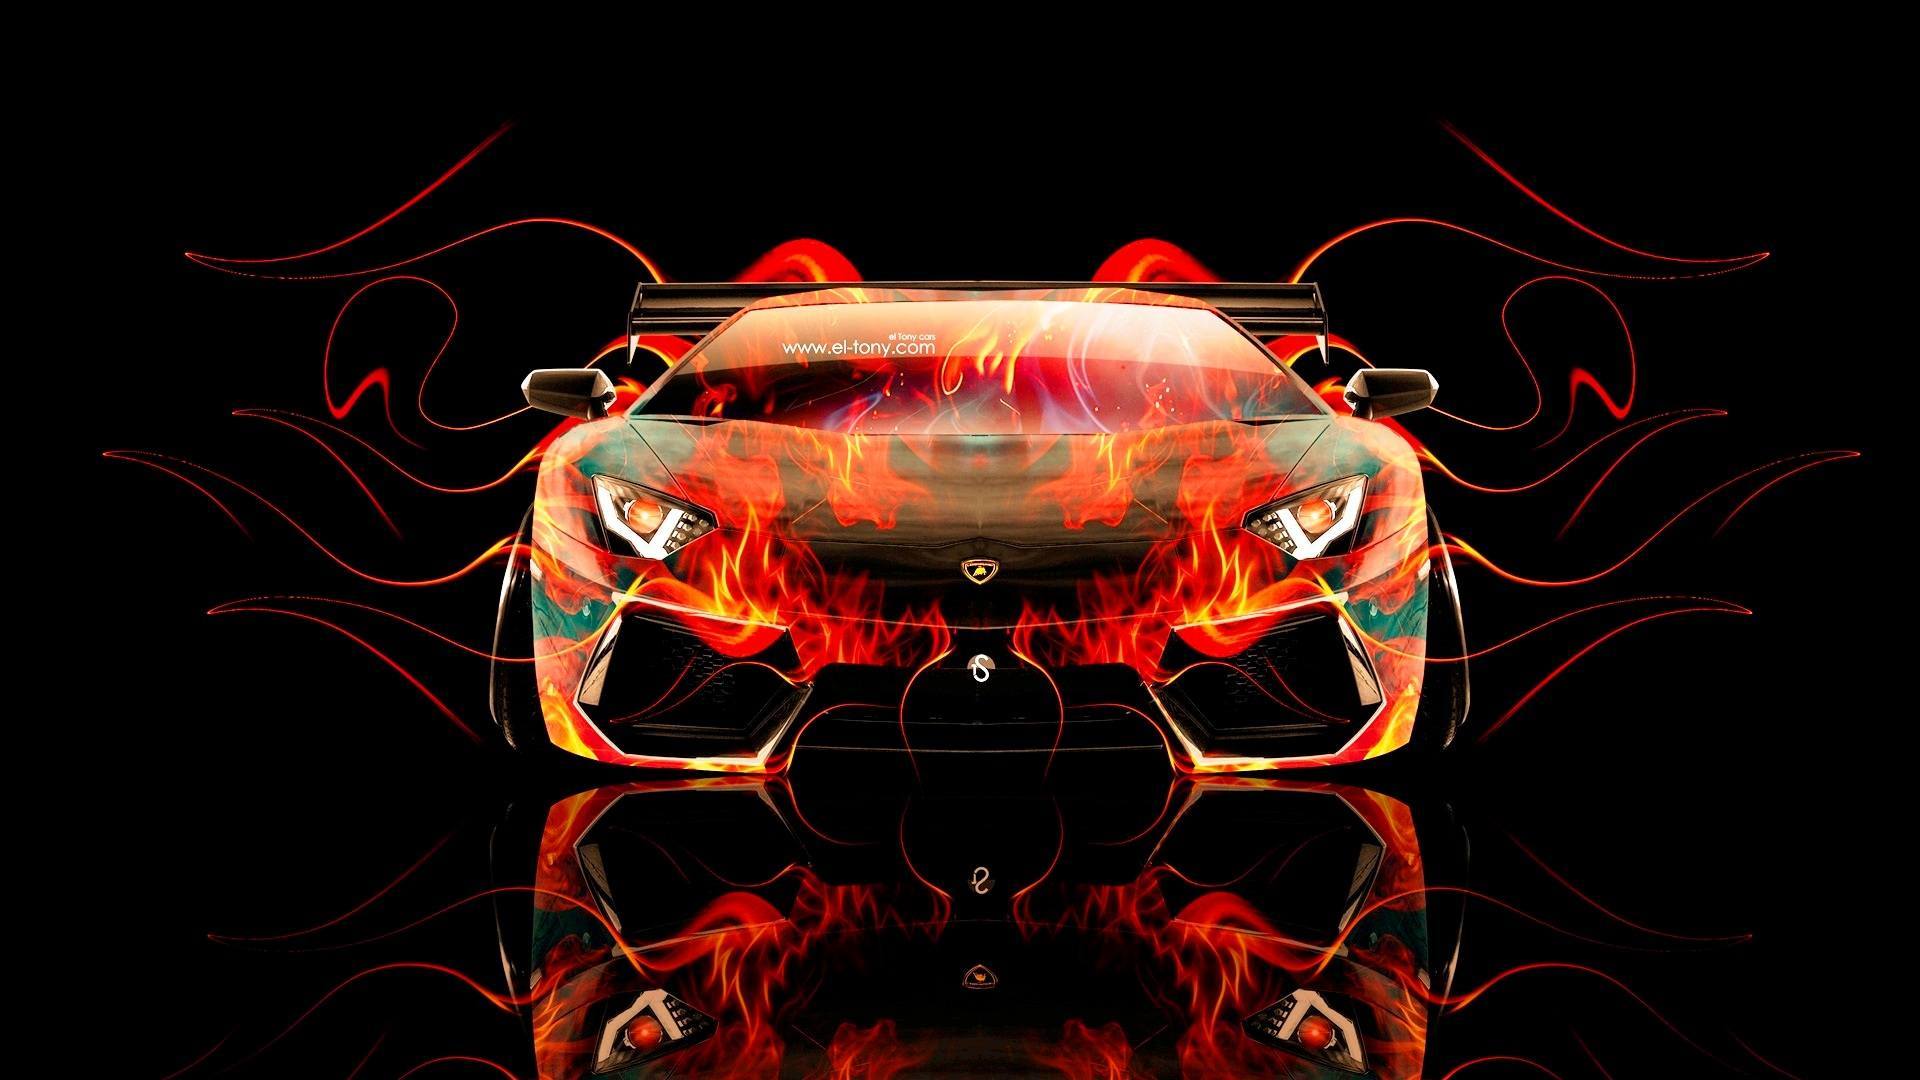 Fire Fast Car Wallpaper Theme for Fast Furious  APK Download for Android   Aptoide